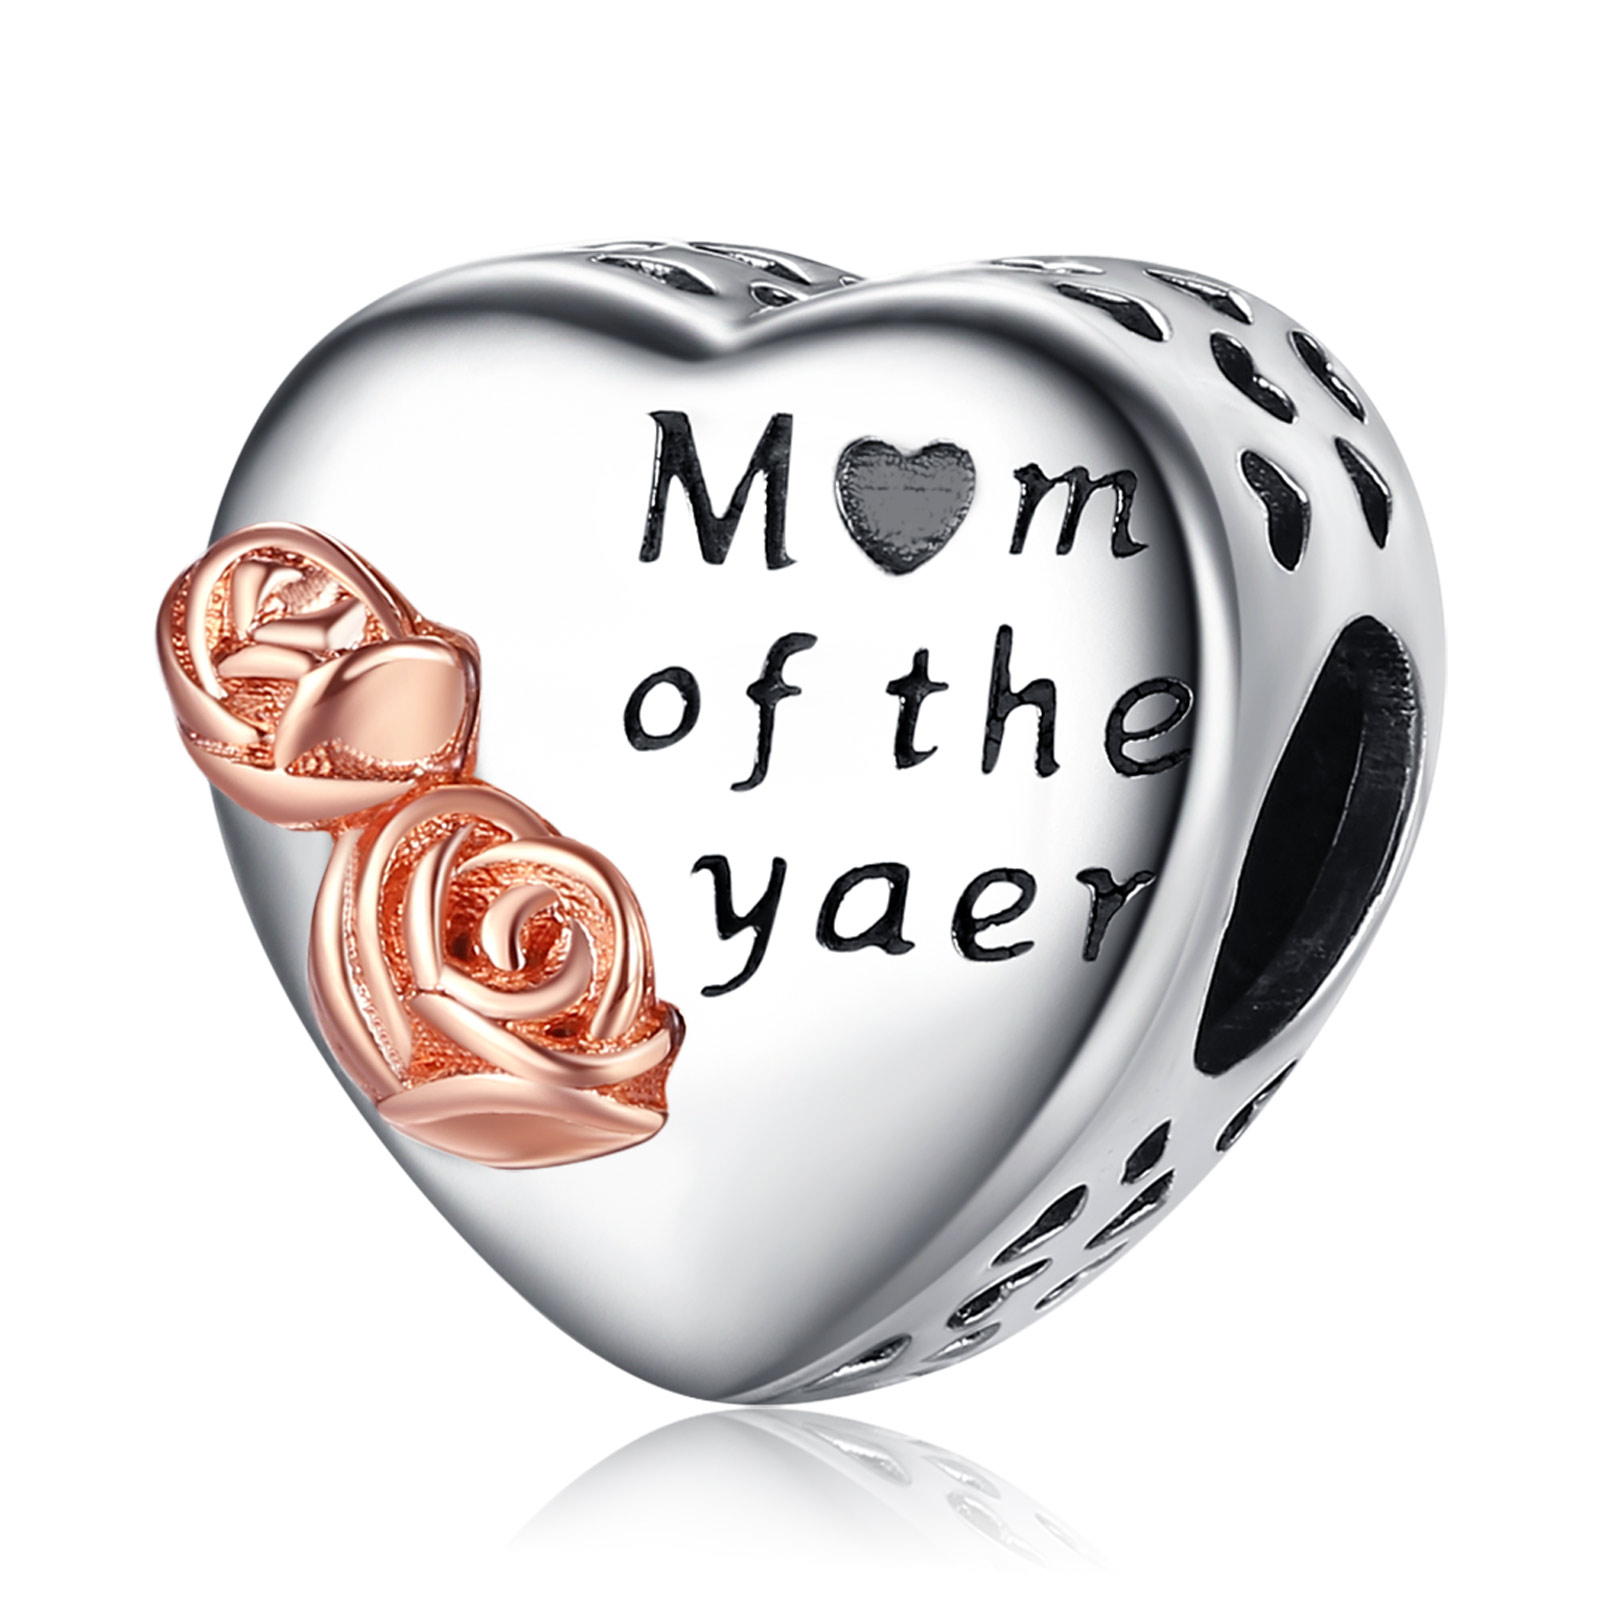 Elegance Redefined: 925 Sterling Silver Heart-shaped Bead Charm with Rose Gold Rose Engraving - A Tribute to Mom of the Year